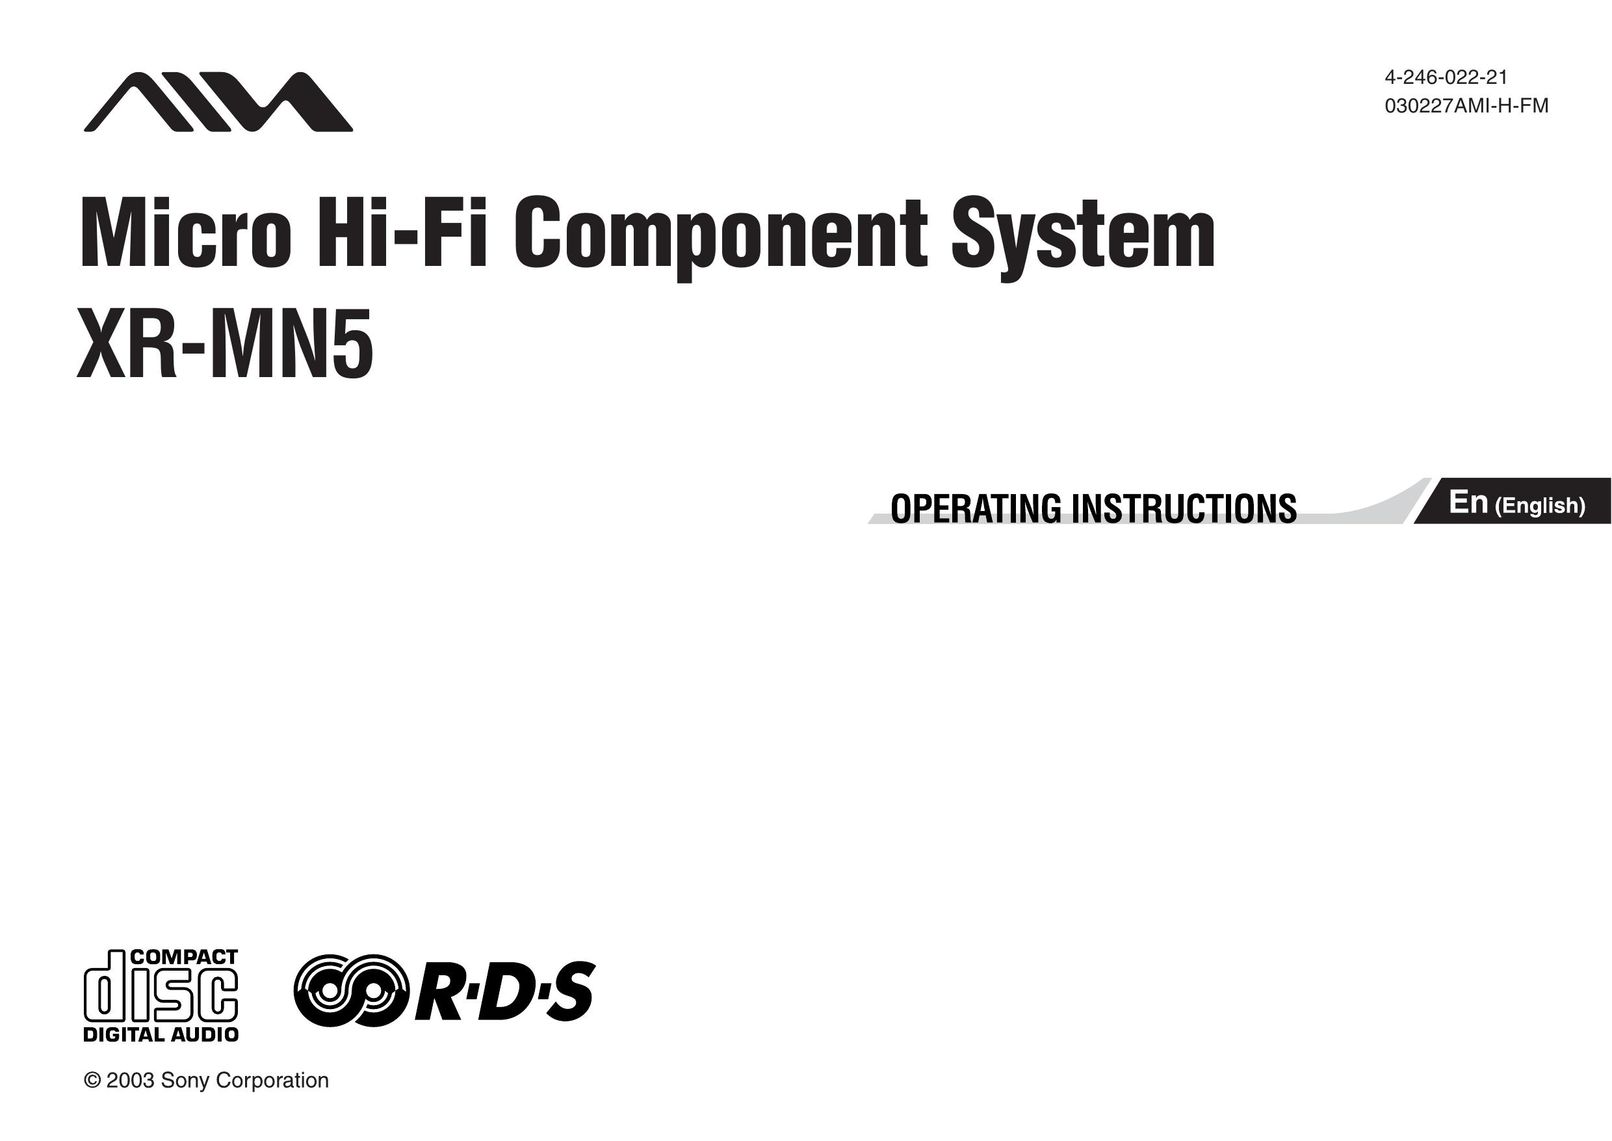 Aiwa XR-MN5 Home Theater System User Manual